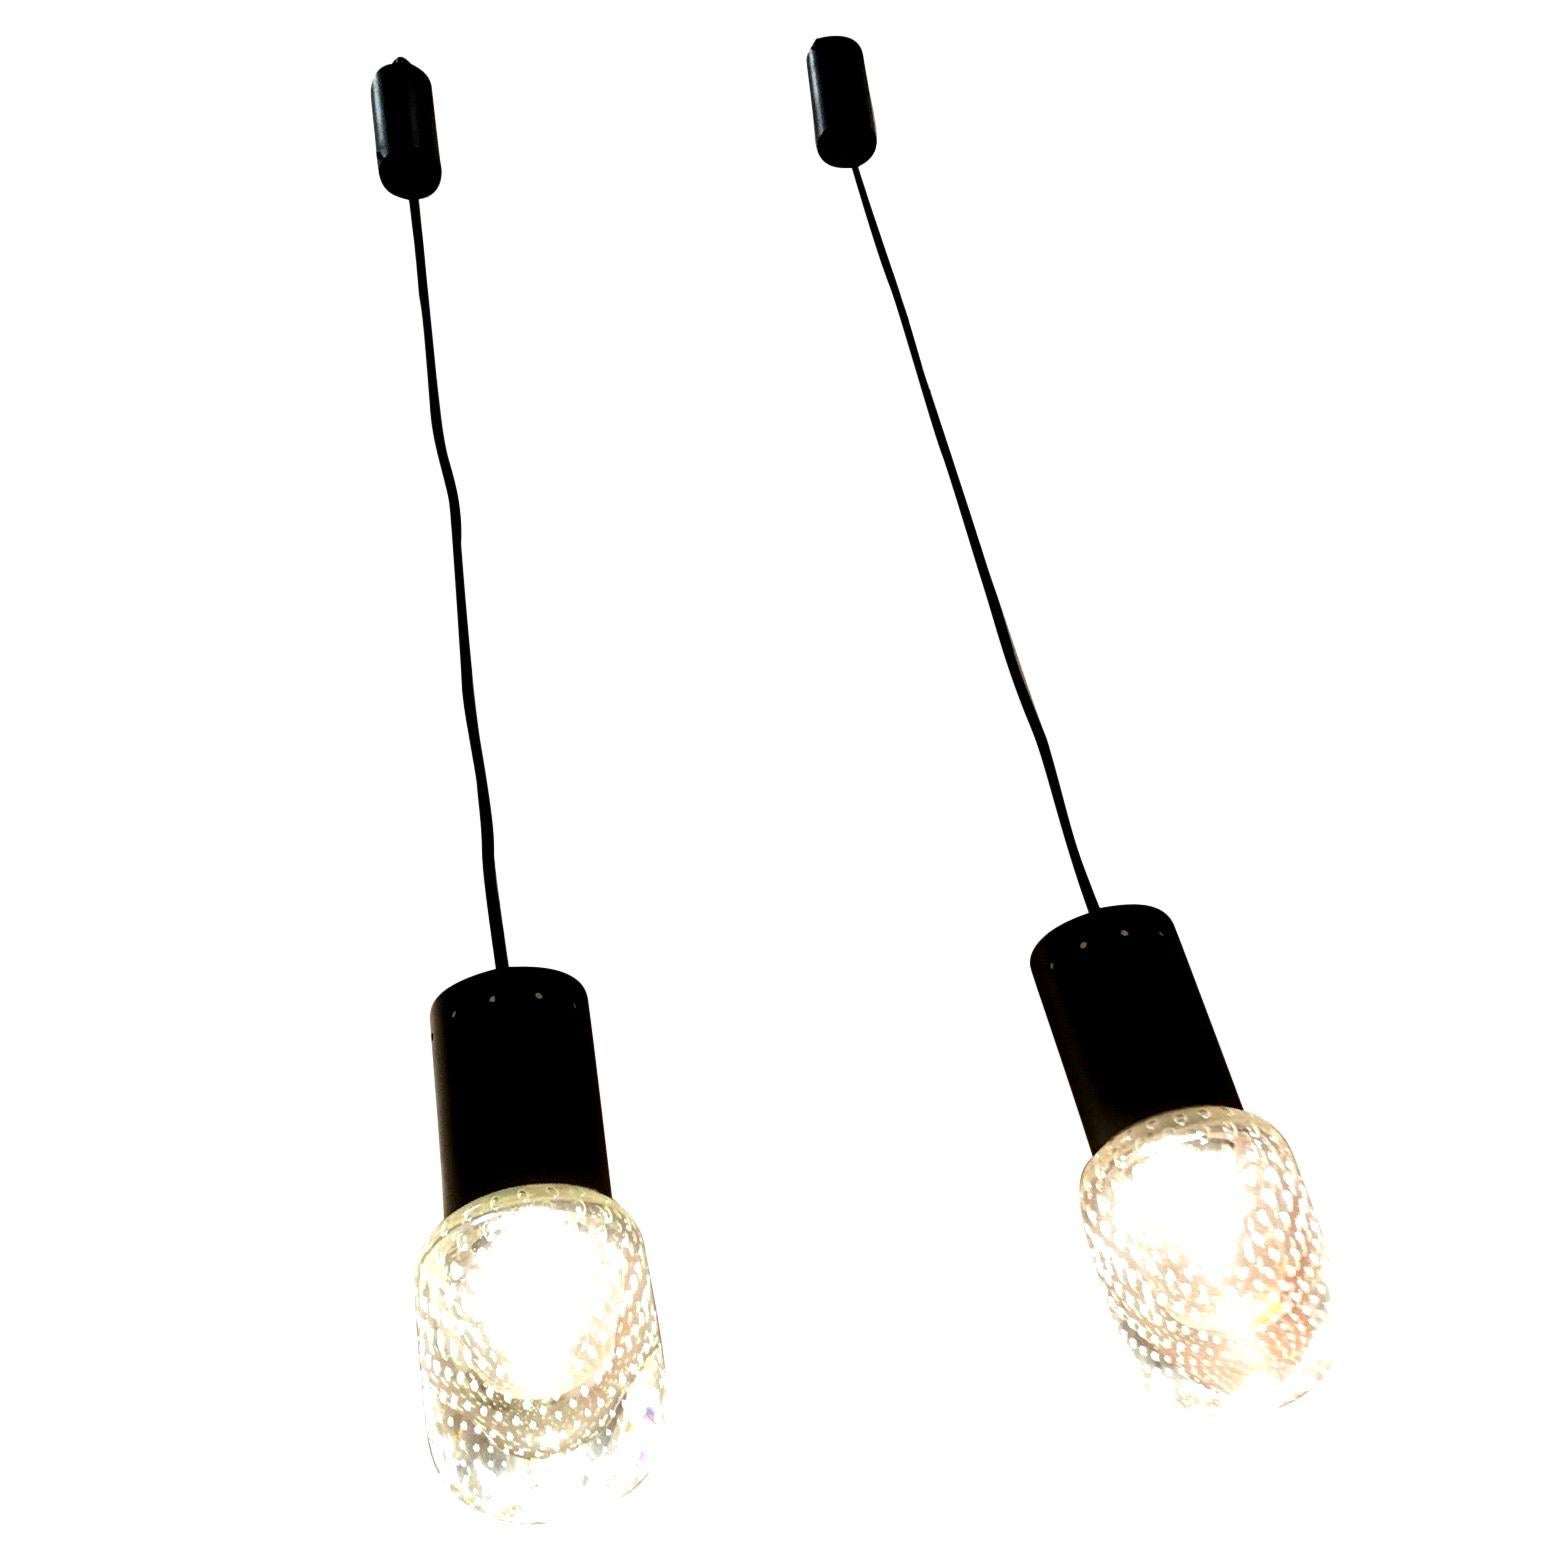 Original Seguso Murano unusual oval shaped glass pendant lights with black fittings, Gino Sarfatti for Arteluce. 
Rare ovoid shape with the original cylindrical ceiling roses. 2 Available.
 